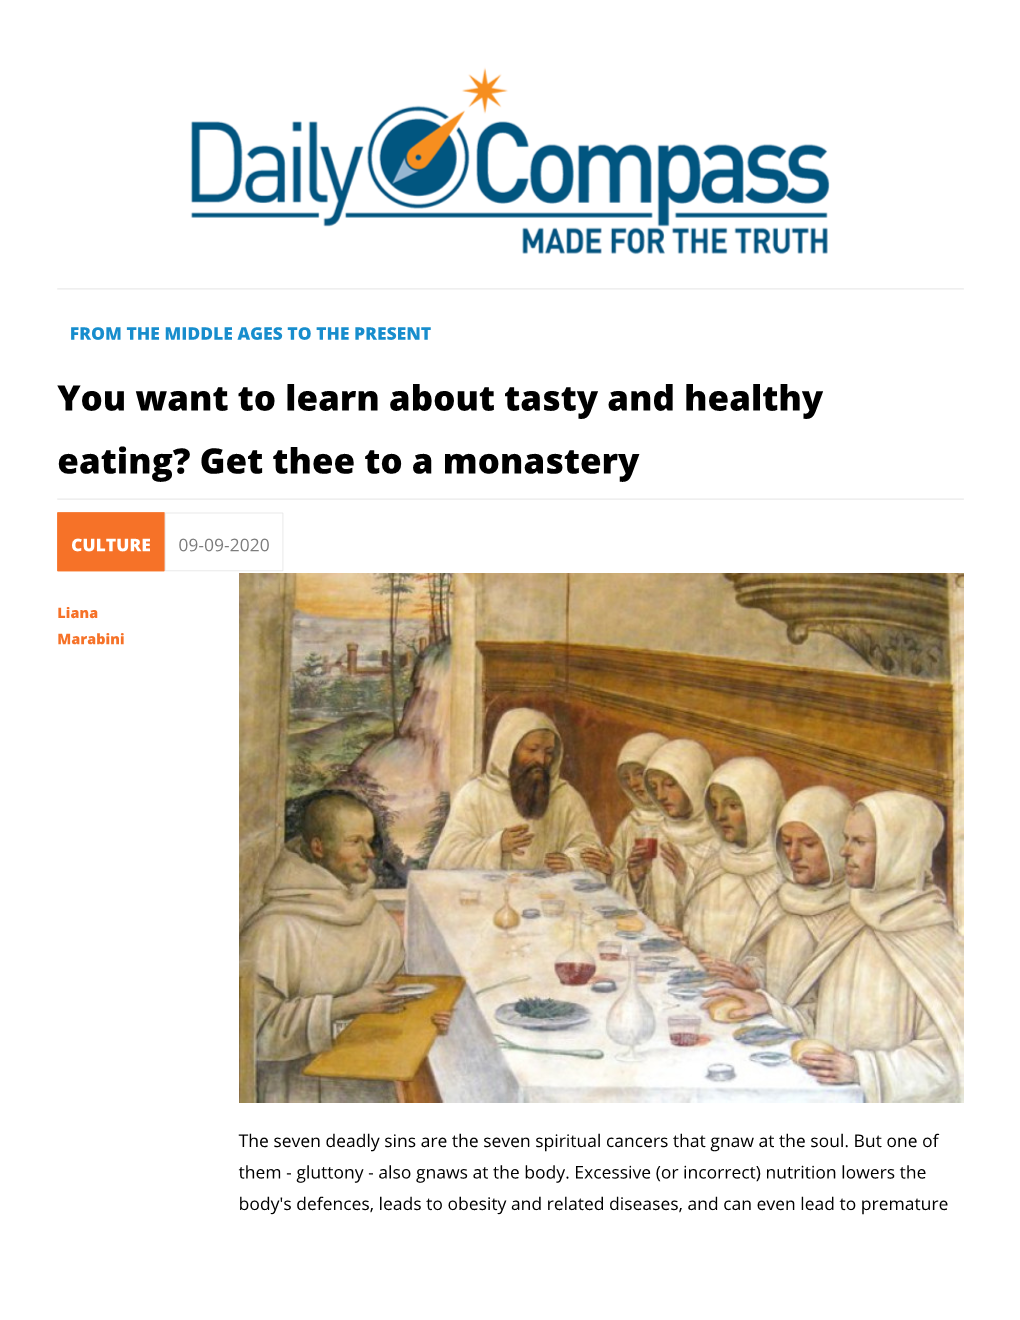 You Want to Learn About Tasty and Healthy Eating? Get Thee to a Monastery